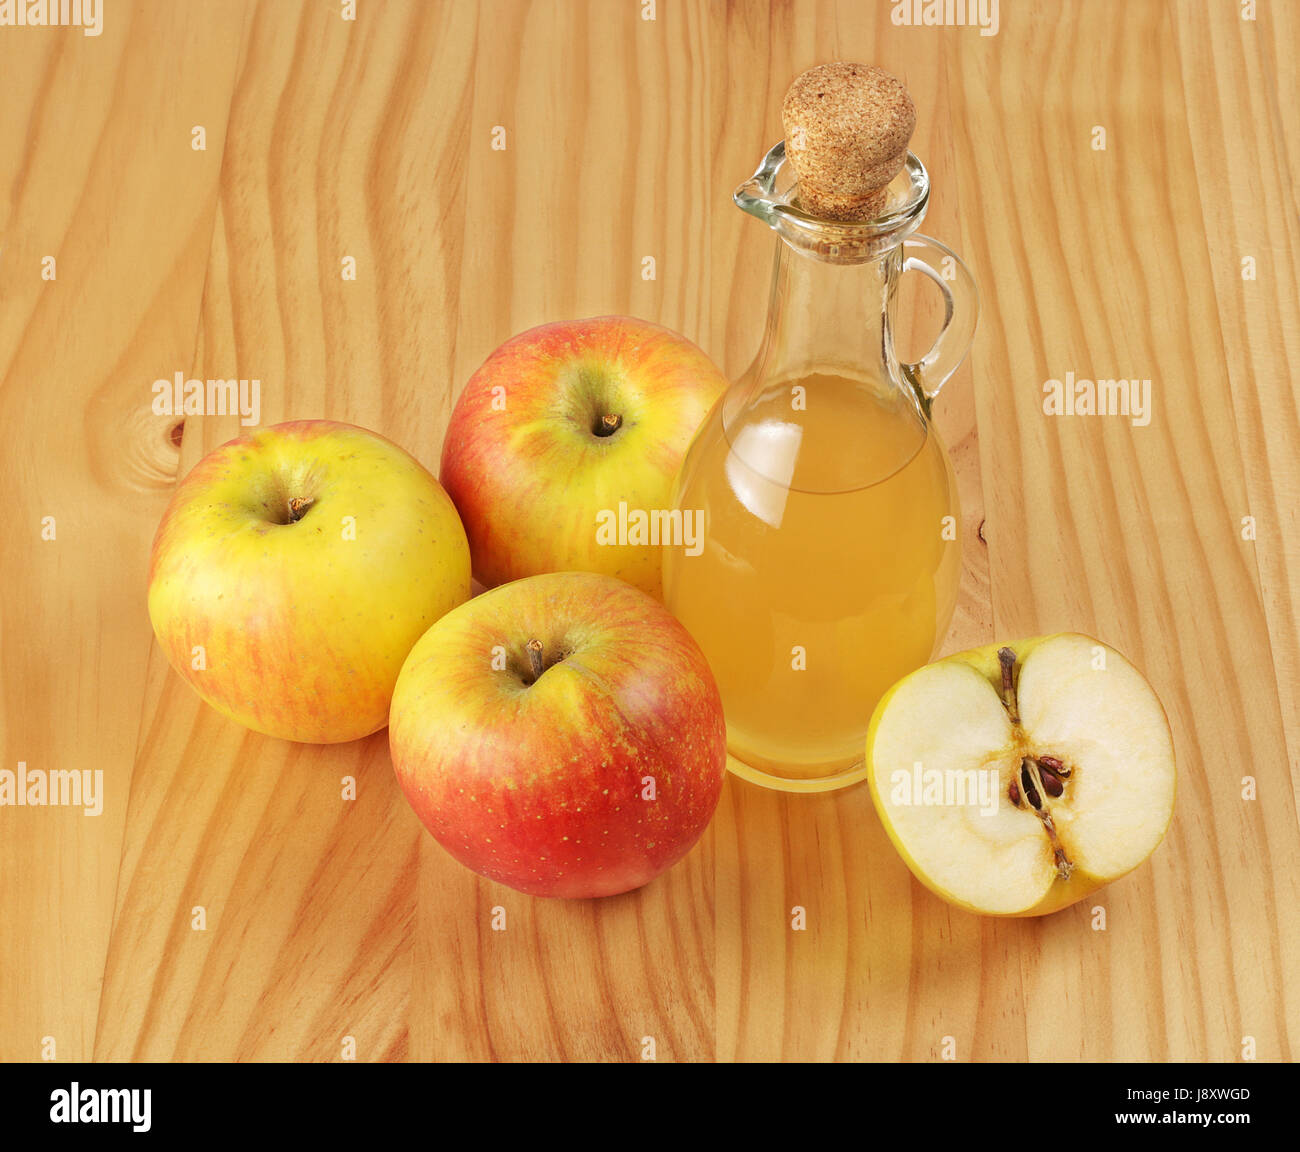 Apple cider vinegar and fresh apple on a wooden background. Stock Photo